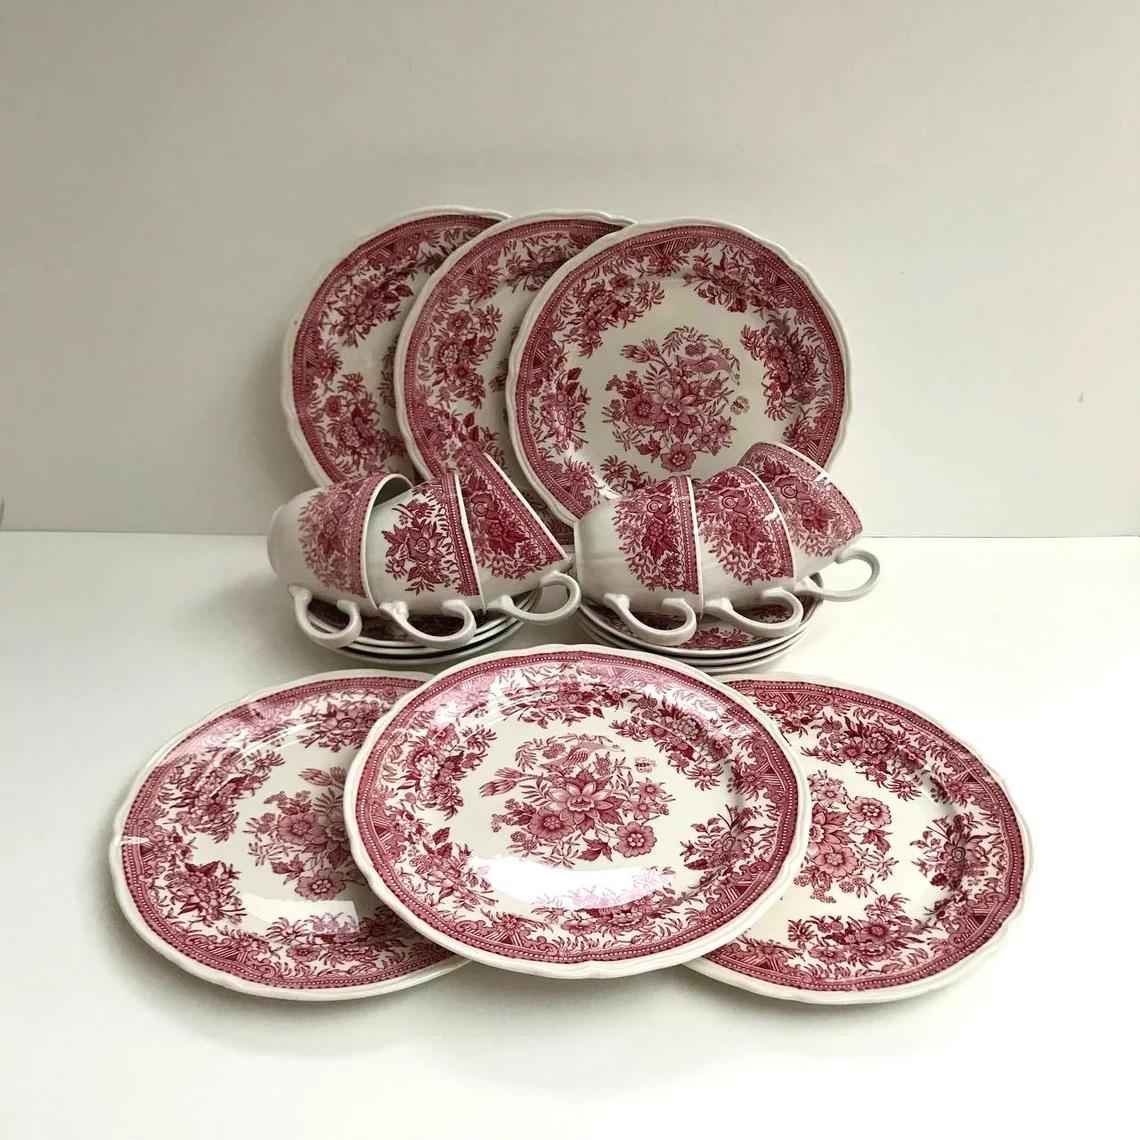 Late 20th Century Villeroy and Boch Red Fasan Porcelain Tea Dinner Set